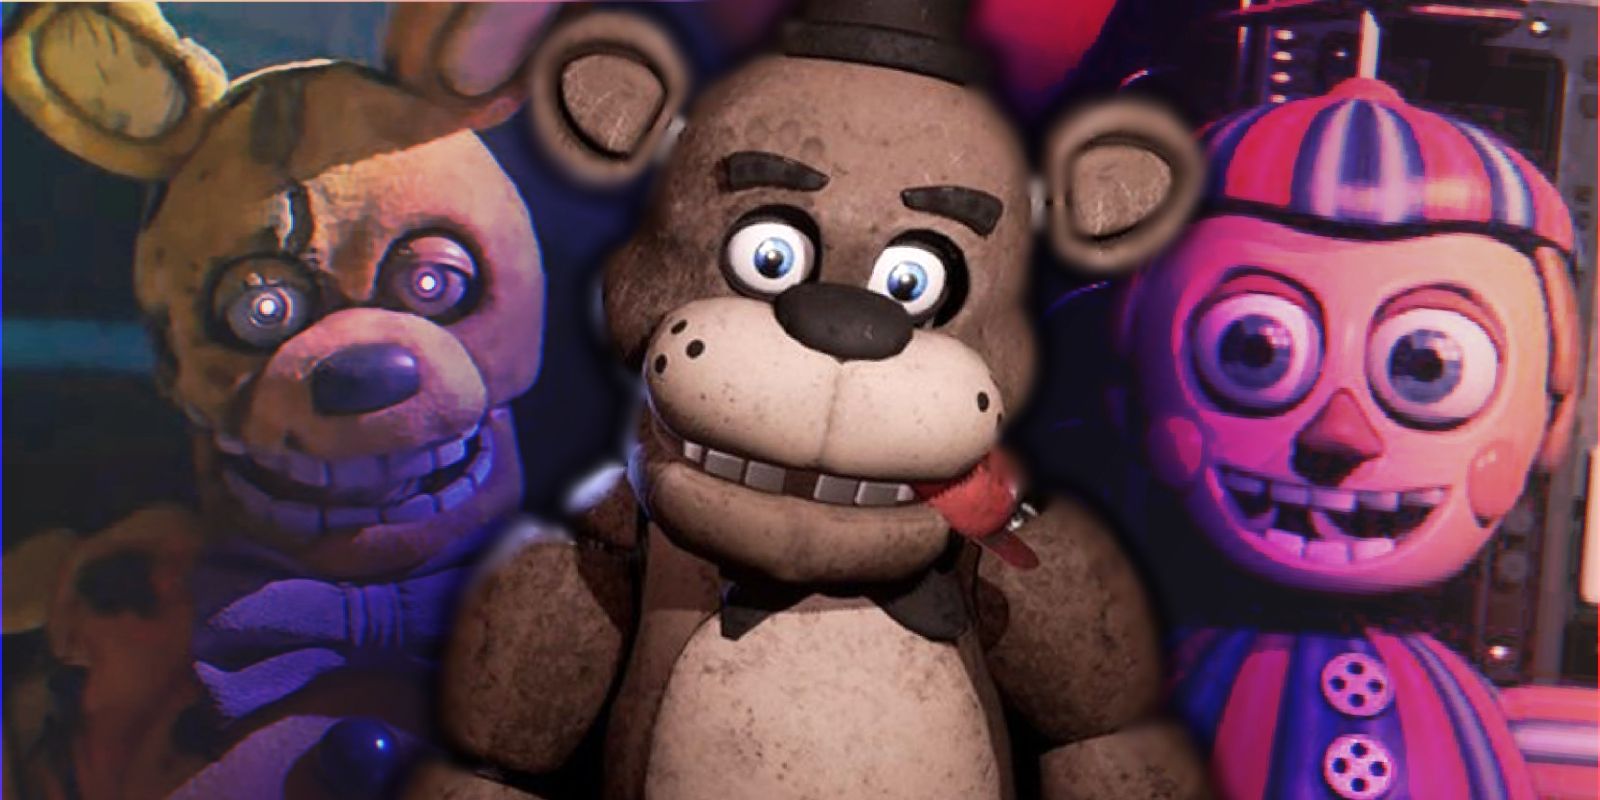 YOU CAN SEE THE FNAF MOVIE ANIMATRONICS IN REAL LIFE!!! PLEASE SOMEONE